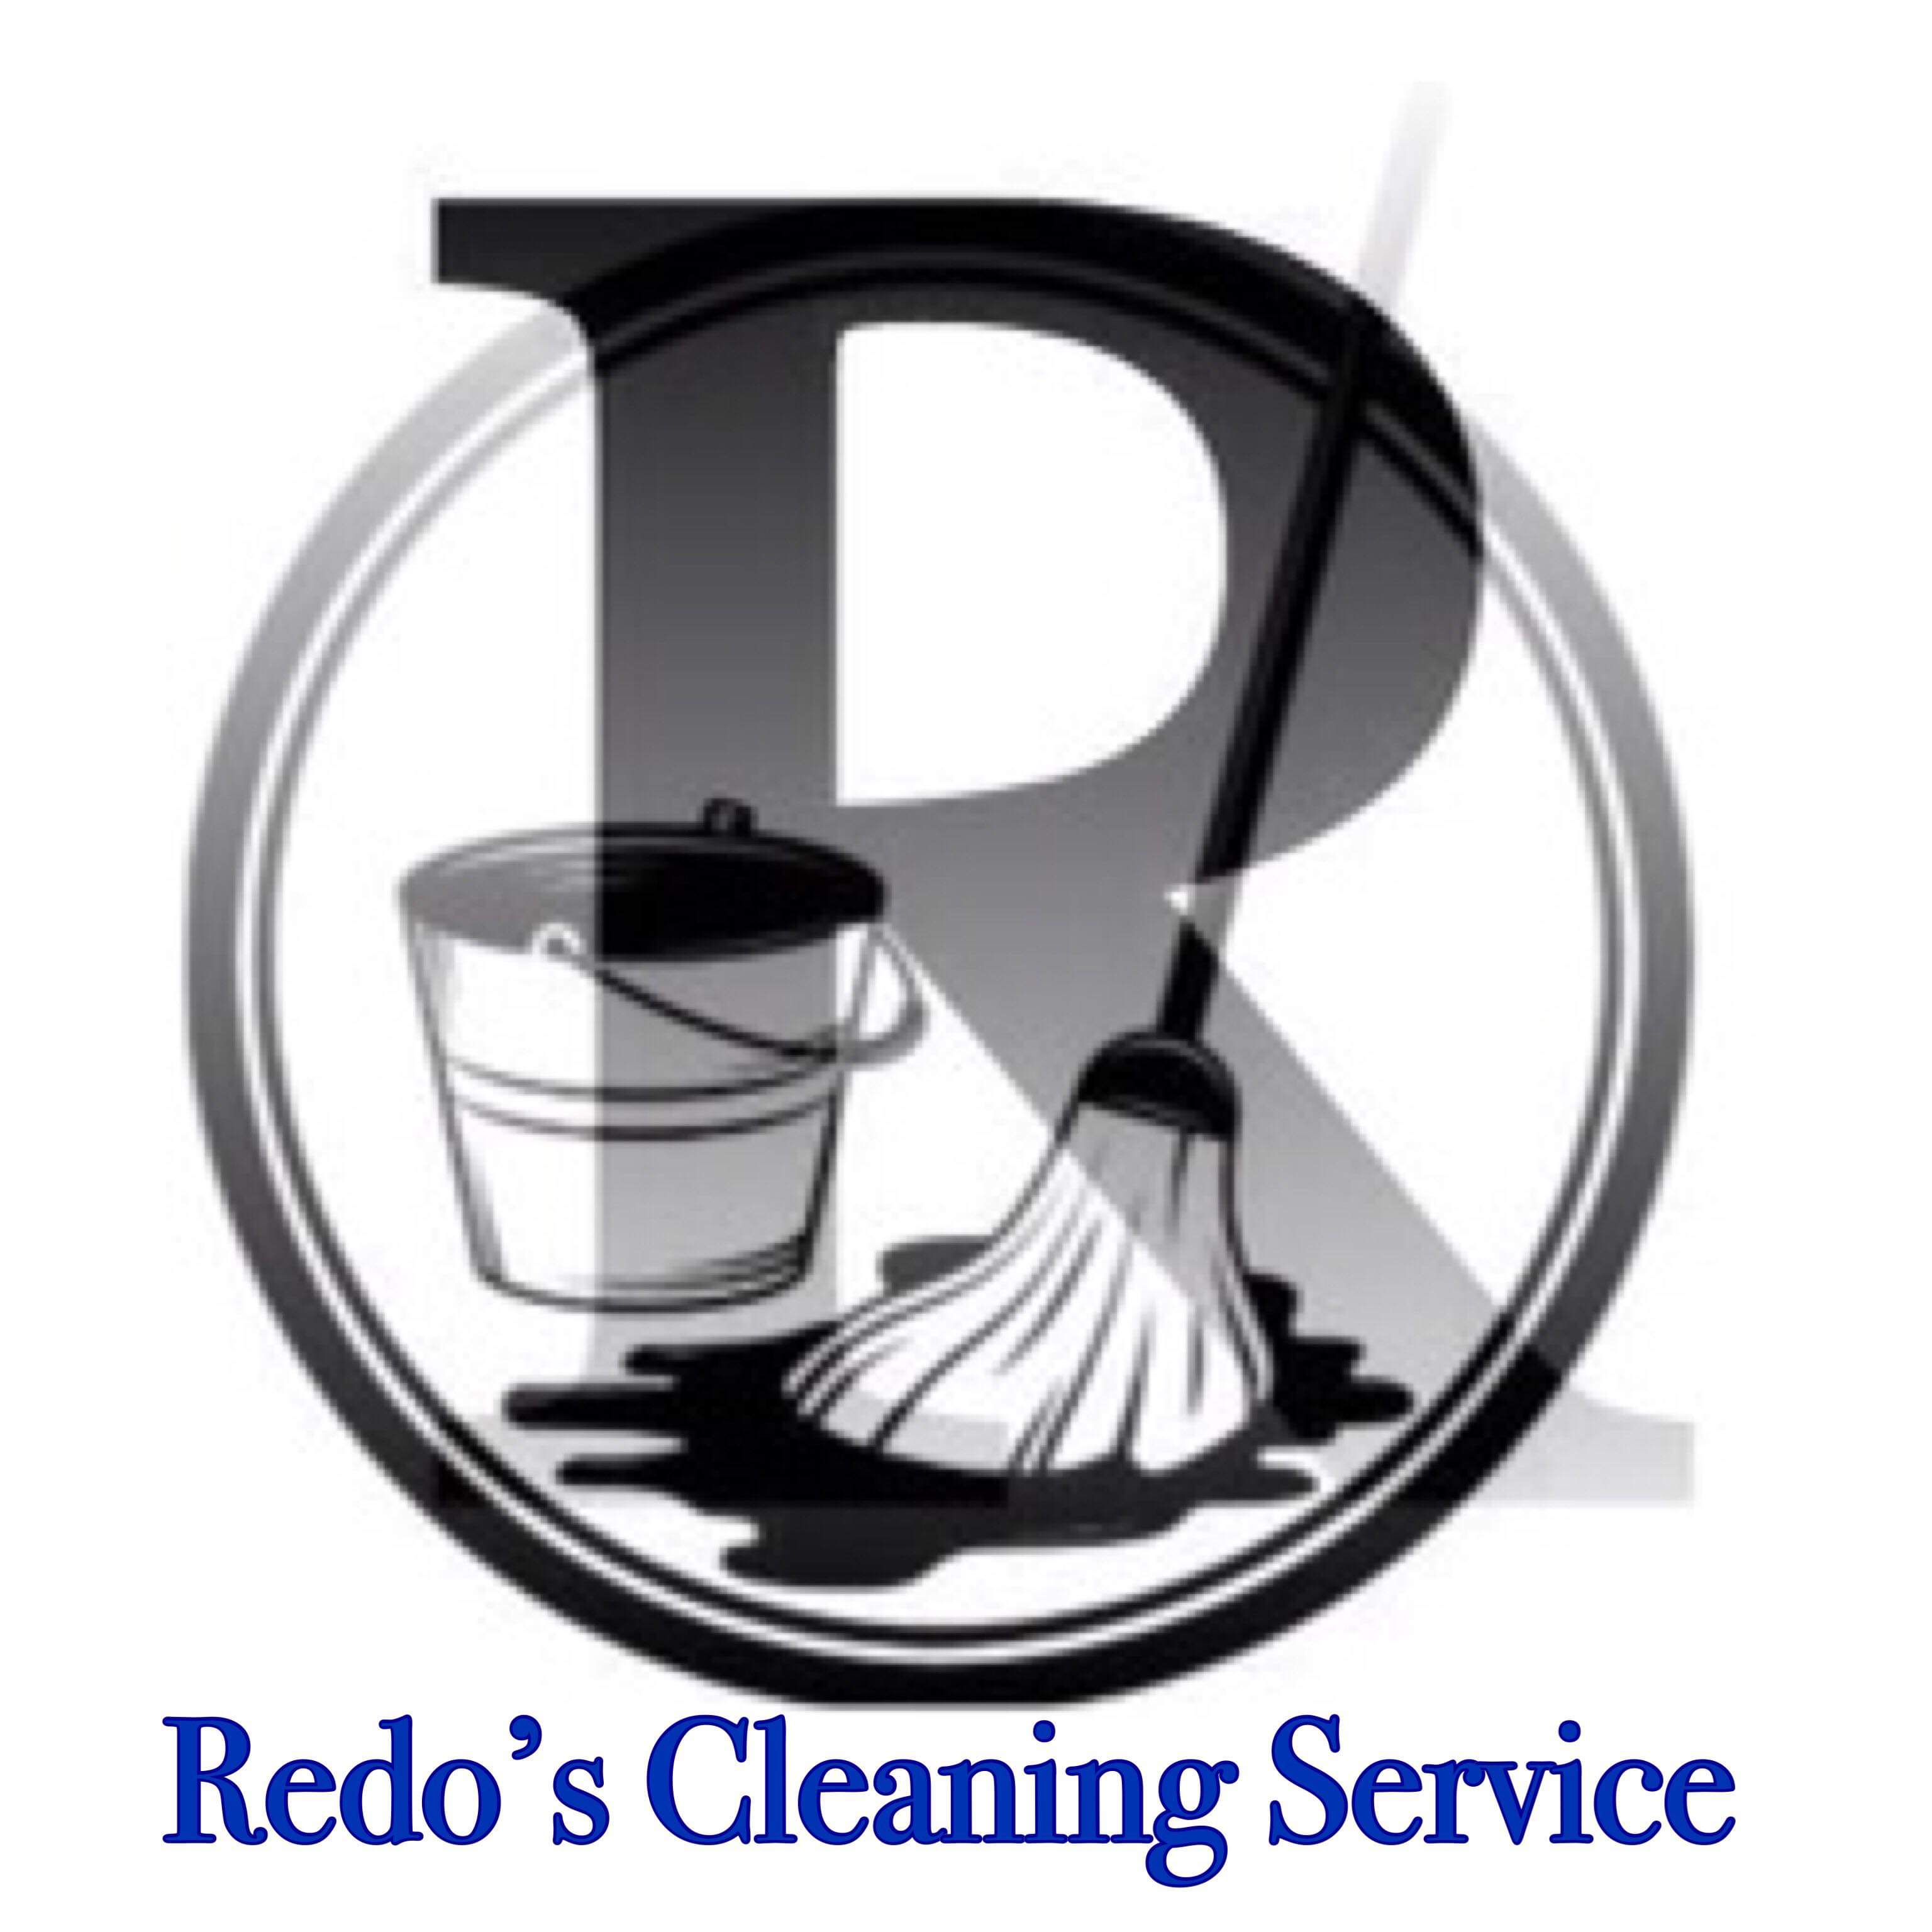 Redo's Cleaning Service